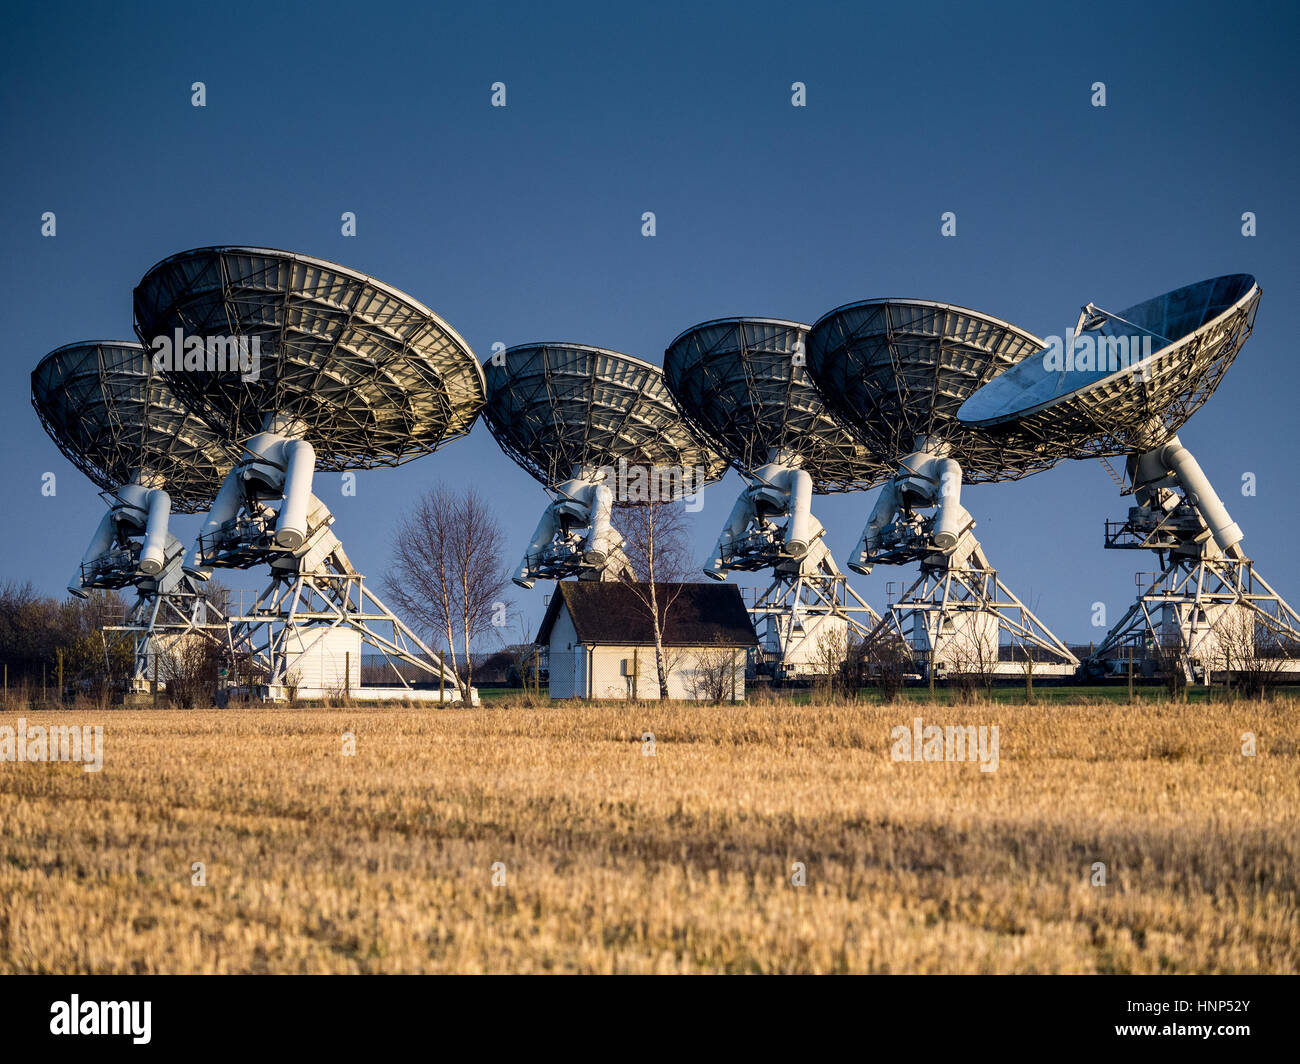 Several radio telescopes, part of the Mullard Radio Astronomy Observatory Arcminute Microkelvin Imager Large Array nr Cambridge. Stock Photo